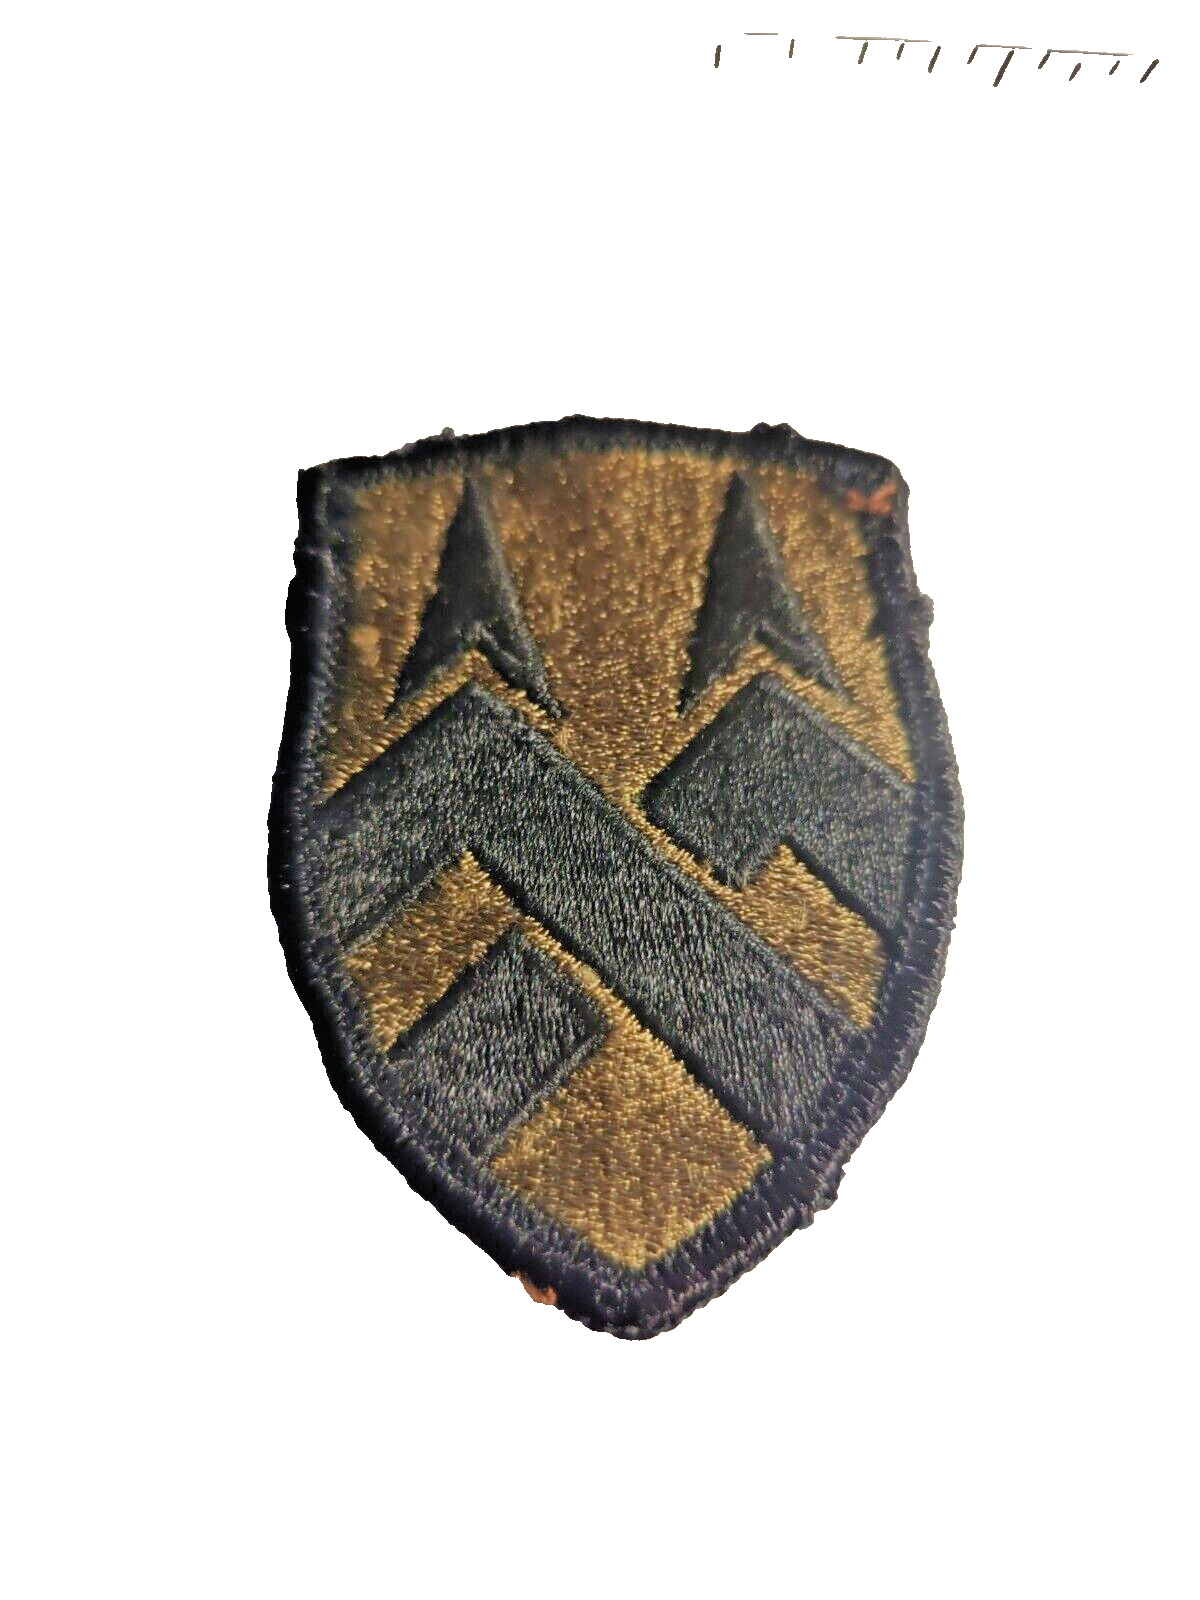  US Army 377th Theater Sustainment Command Military Patch. (U)